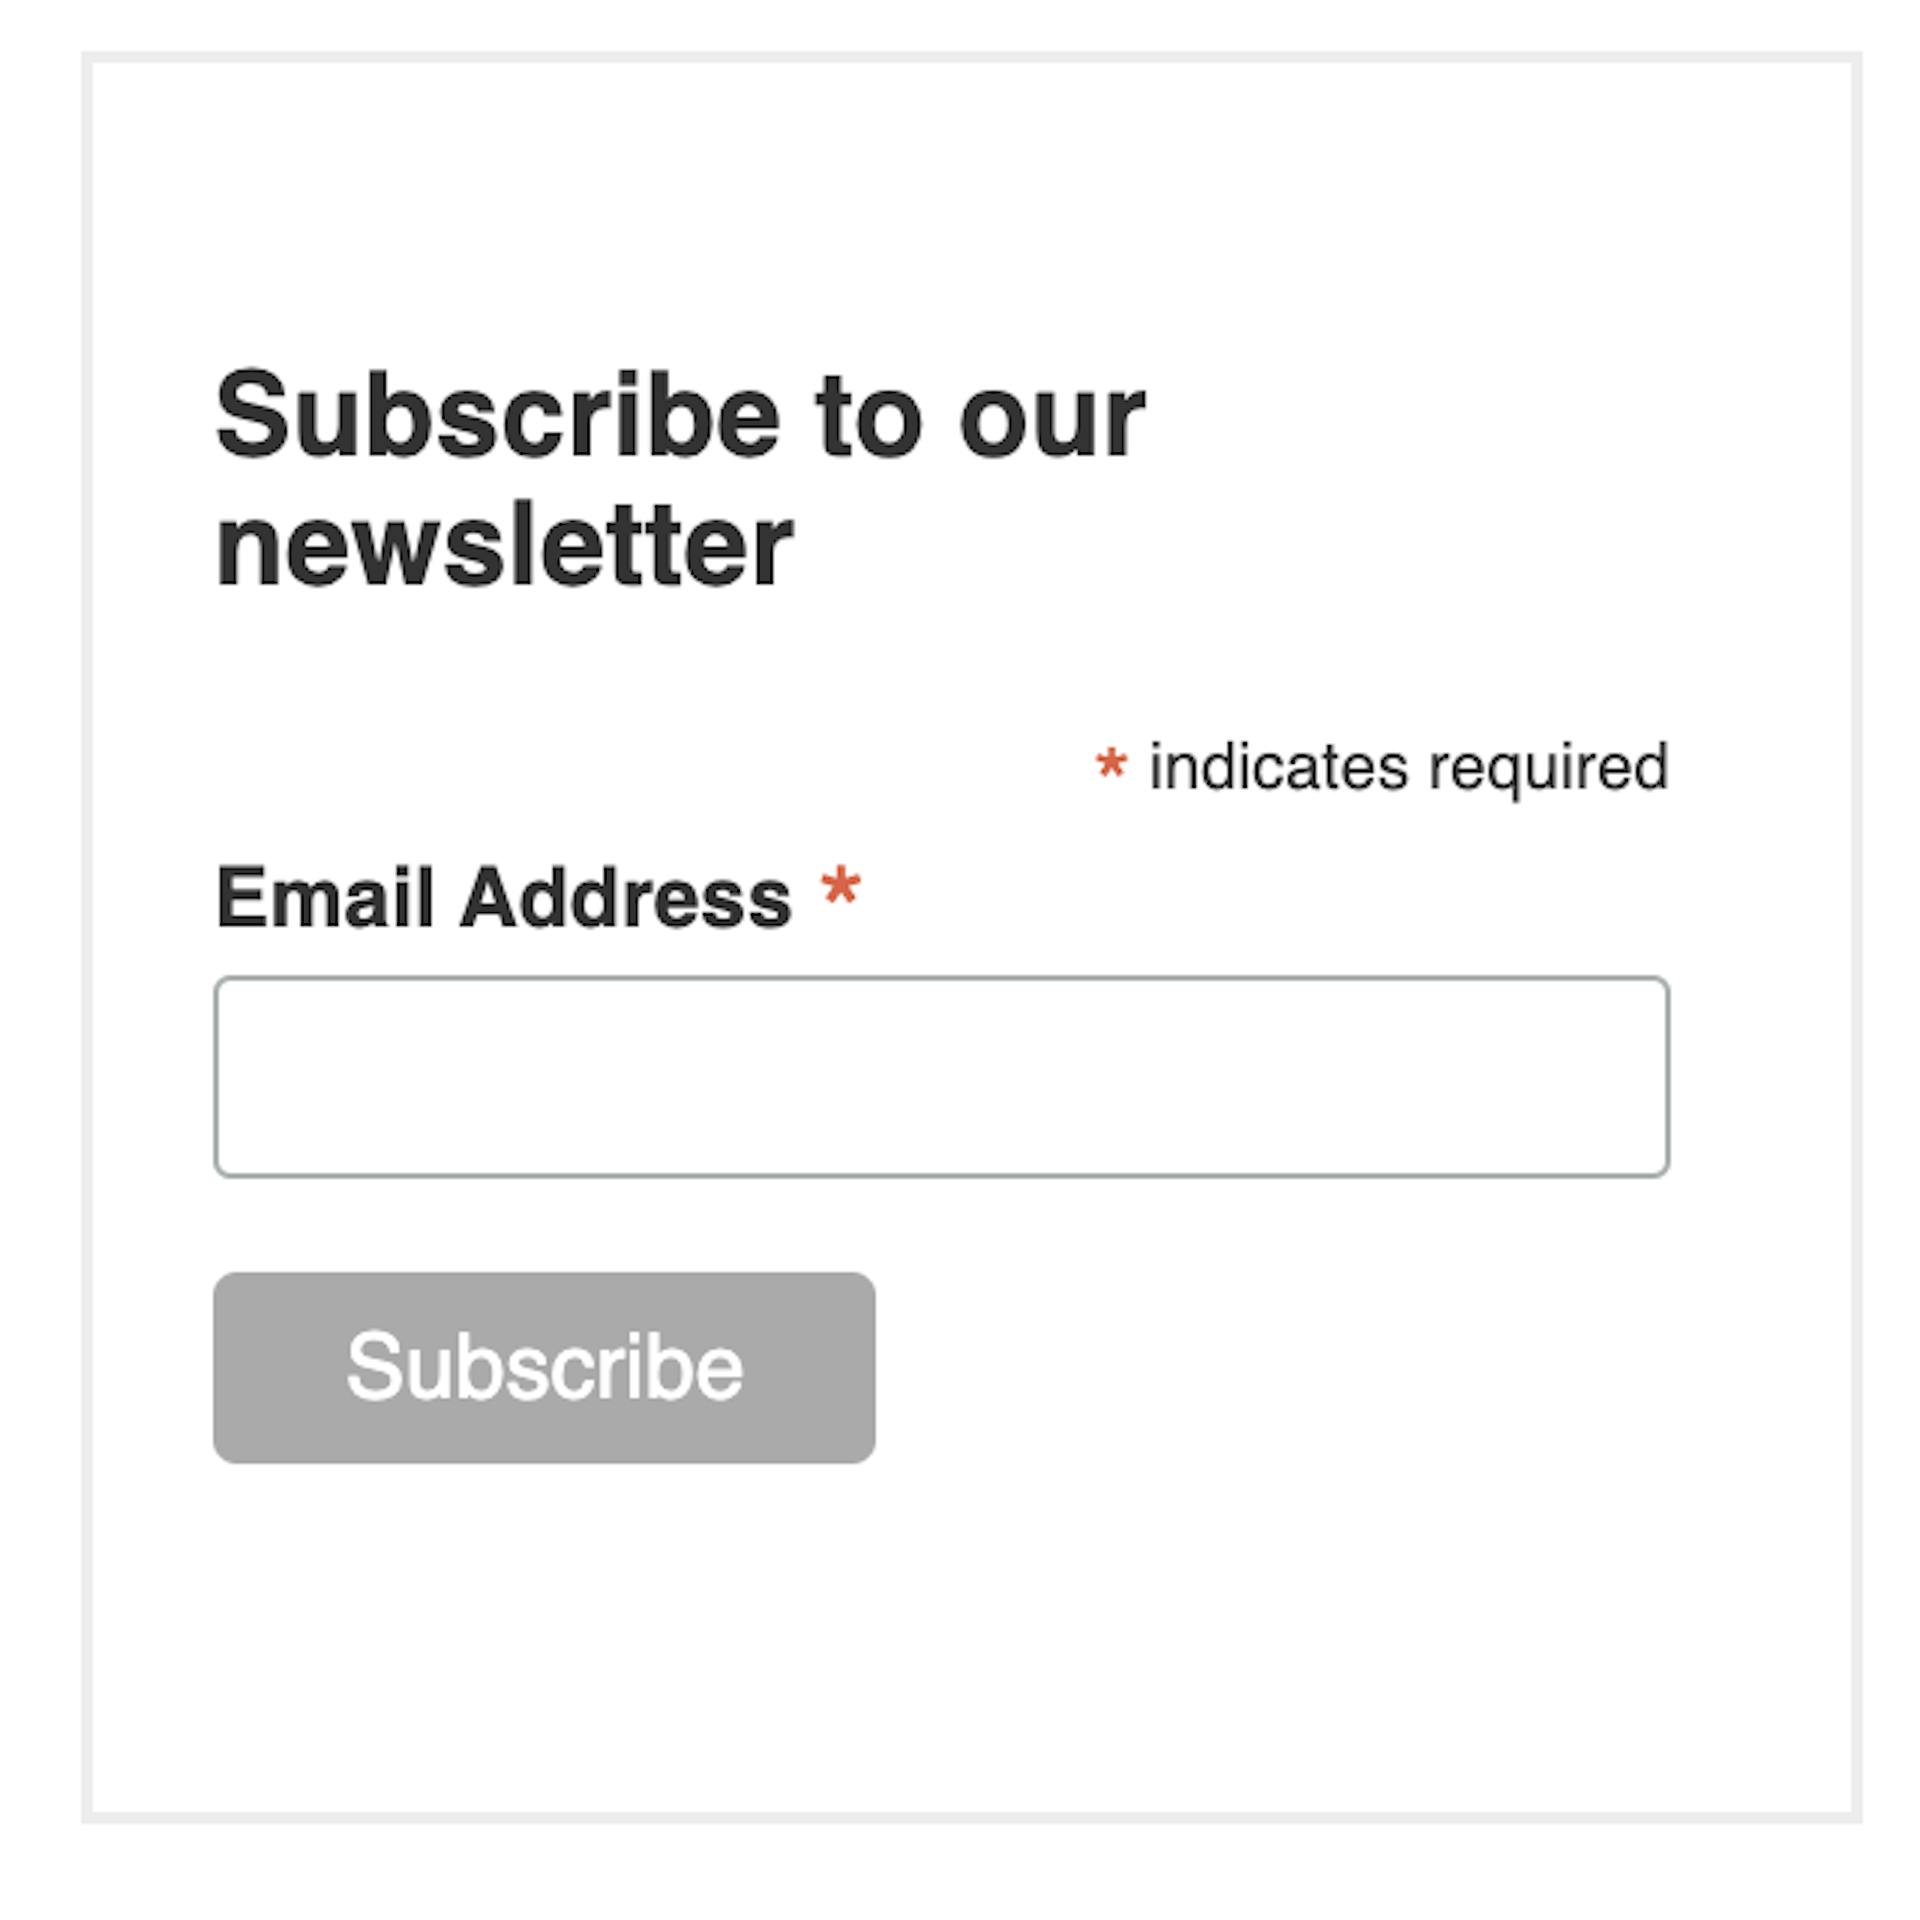 Example of a bad newsletter subscription